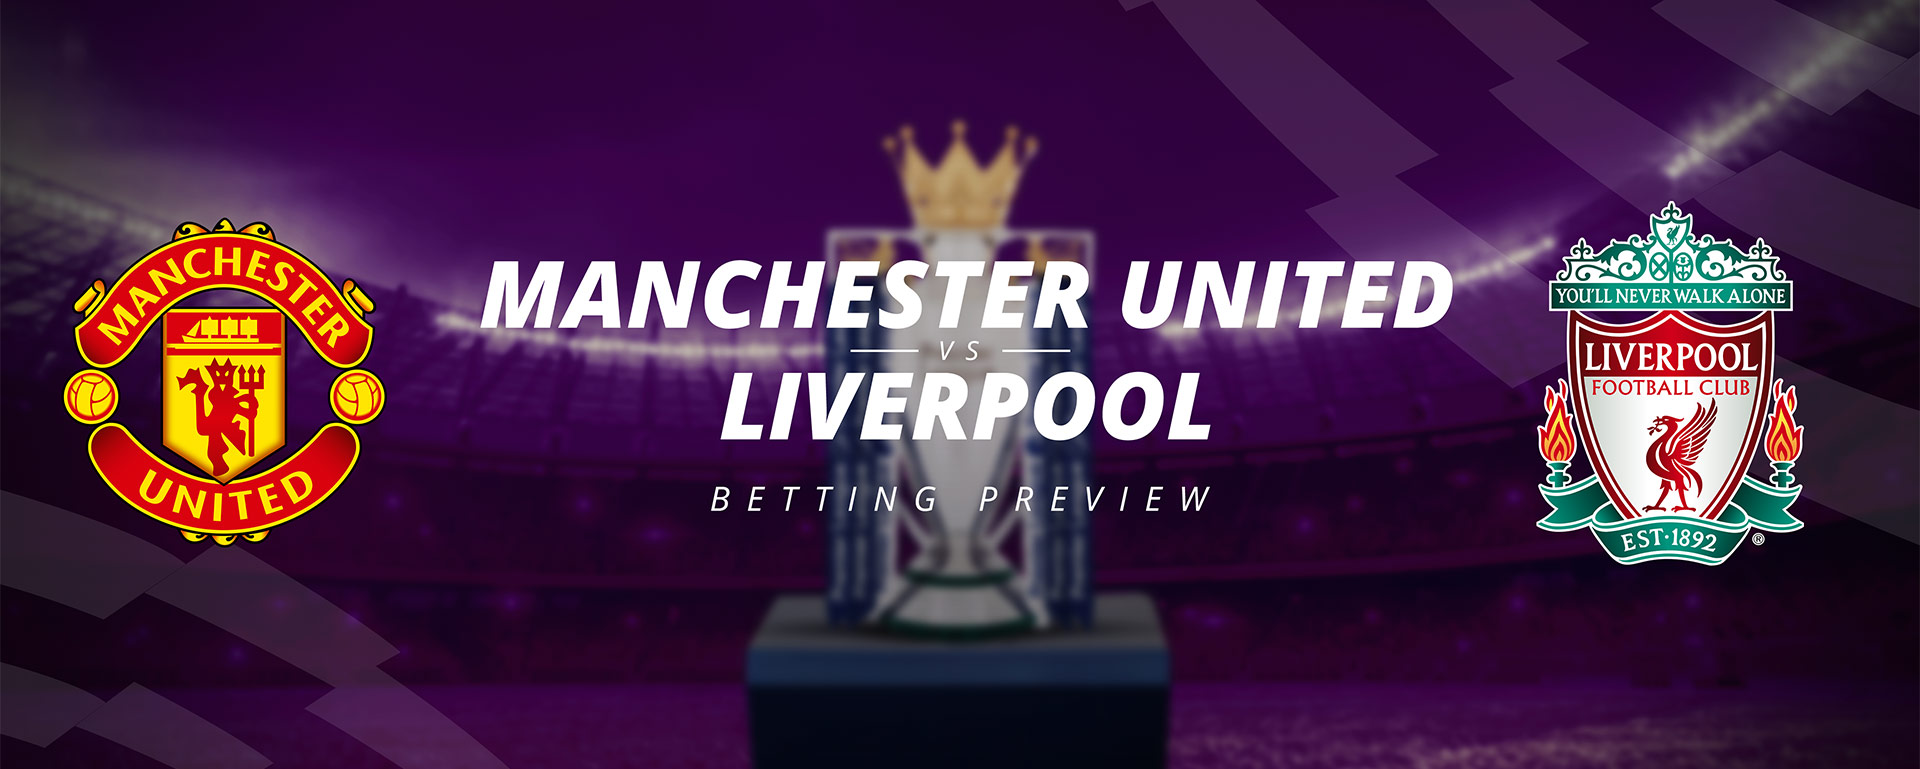 MANCHESTER UNITED VS LIVERPOOL: BETTING PREVIEW